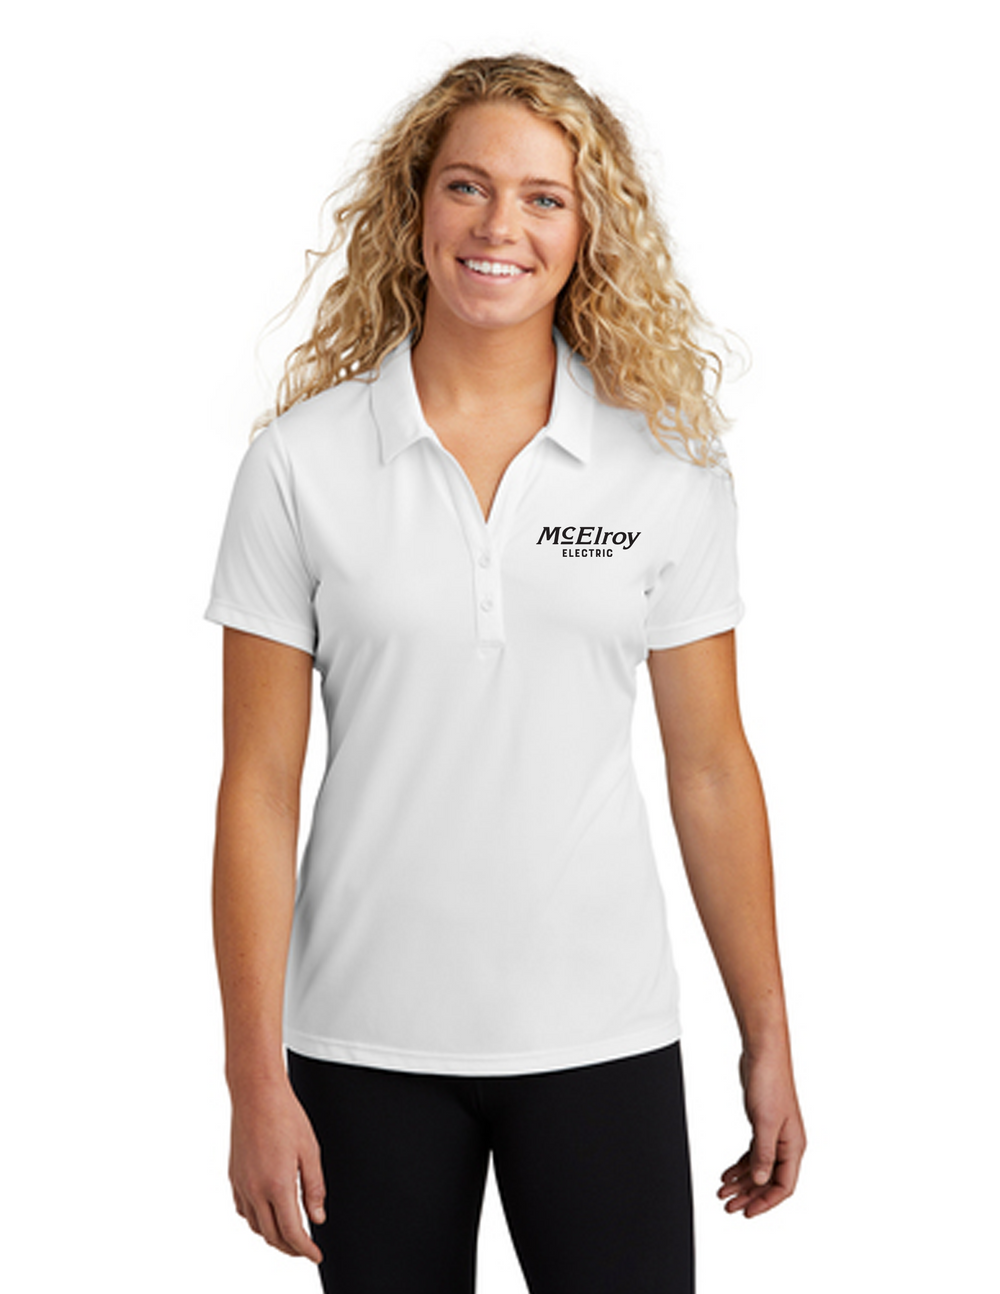 McElroy Electric - Sport-Tek Ladies PosiCharge Competitor Polo - LST550